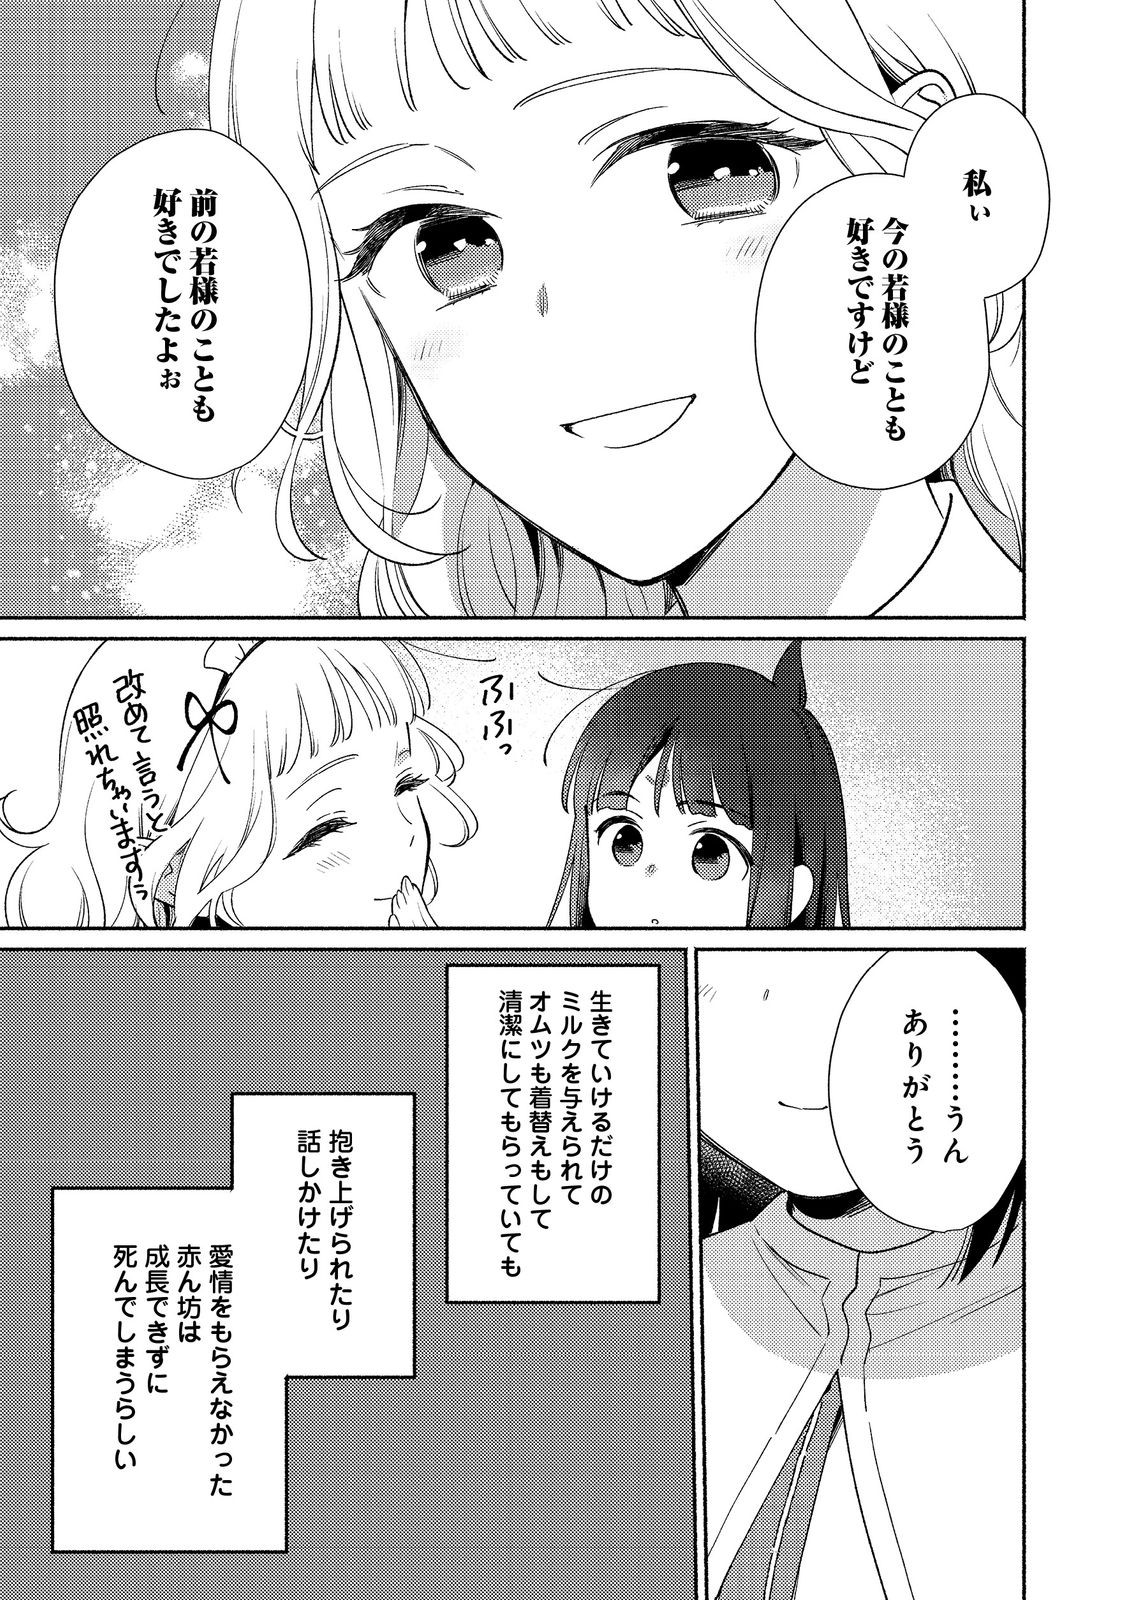 I’m the White Pig Nobleman 第21.2話 - Page 9